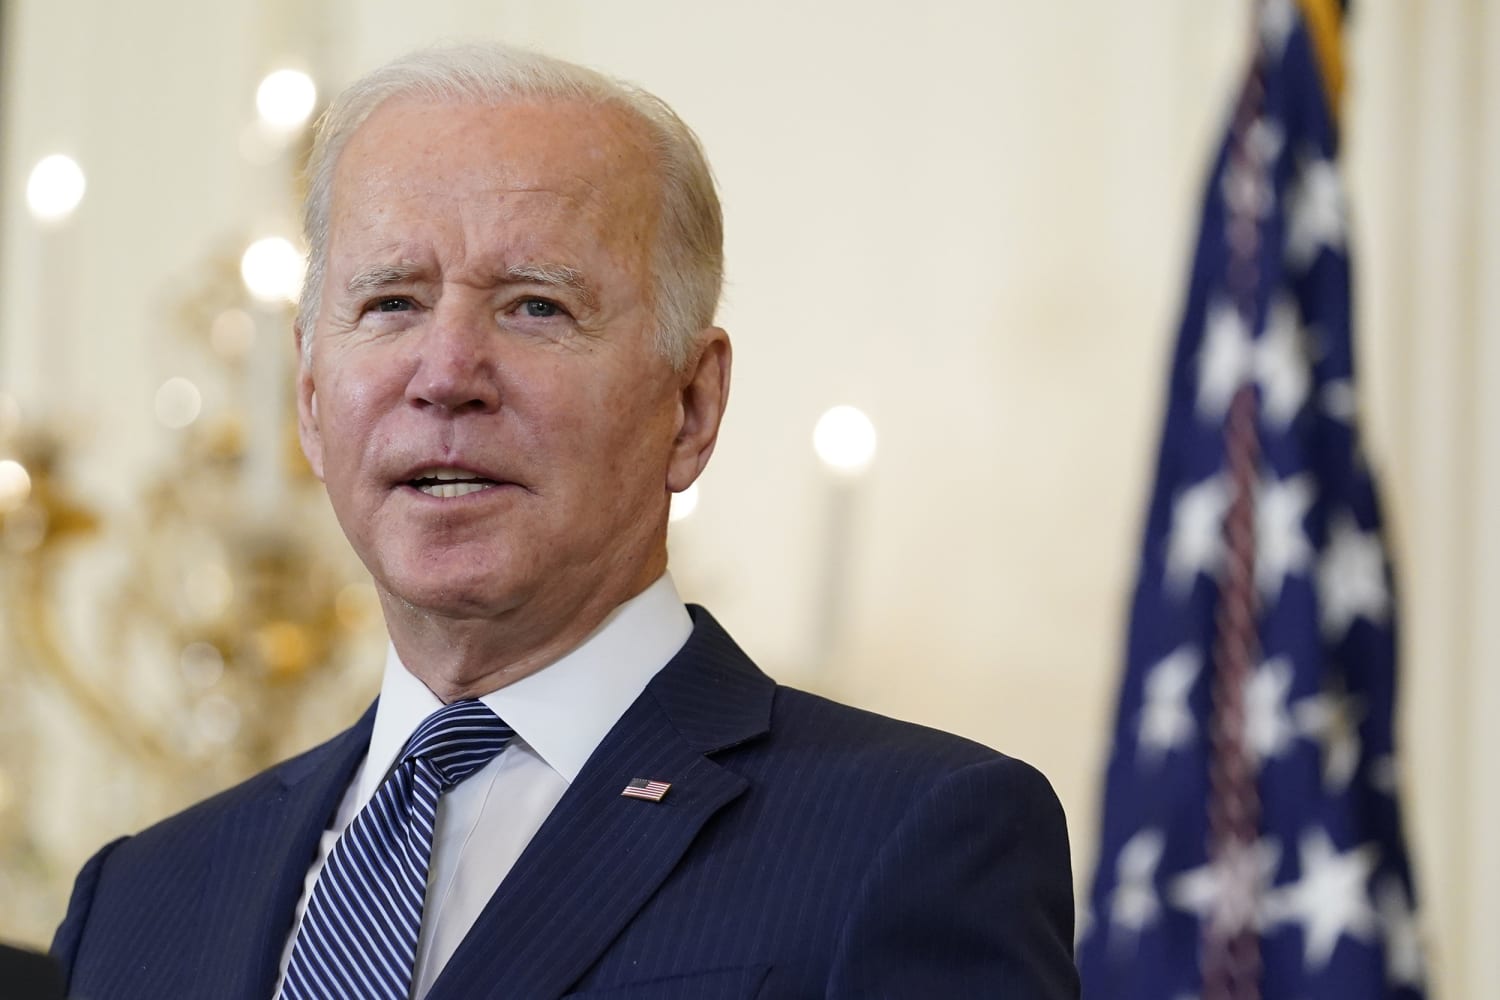 Biden indicates Build Back Better talks likely to stretch into January